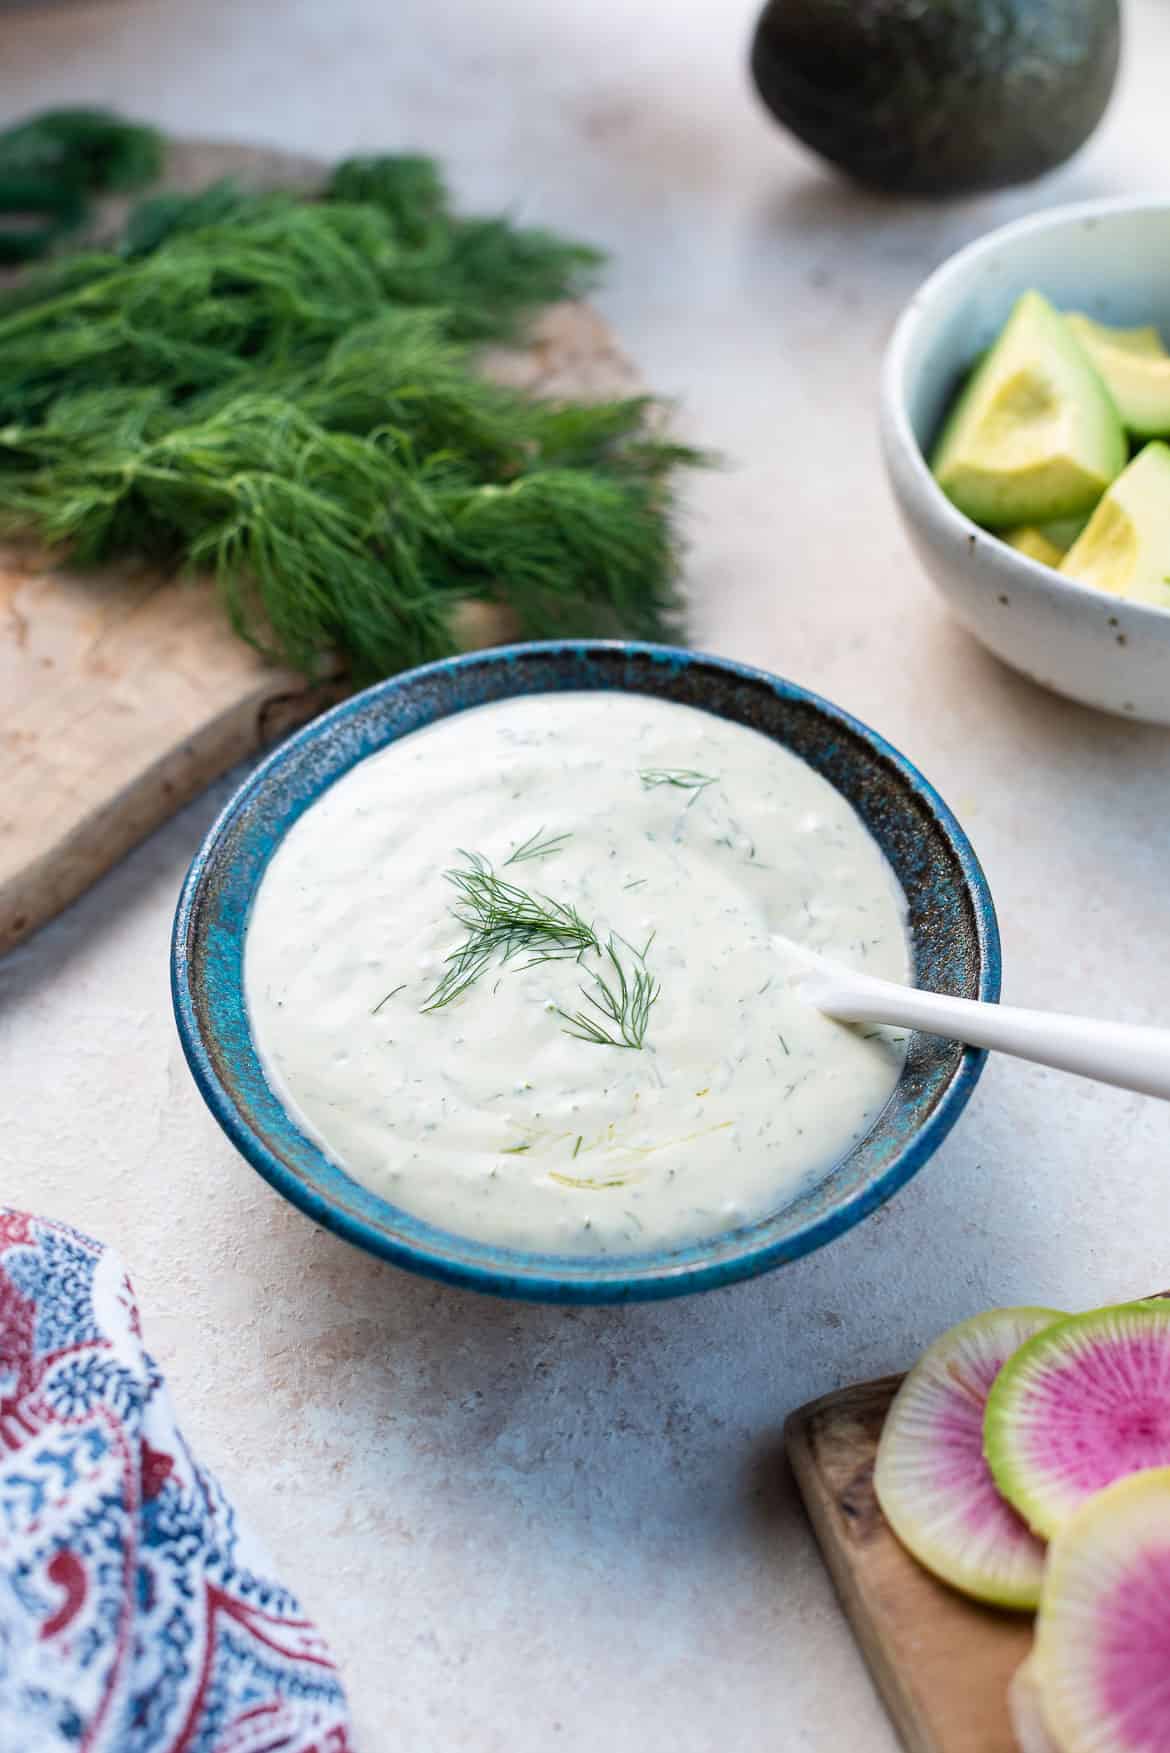 Homemade mayonnaise dressing with dill in a bowl.